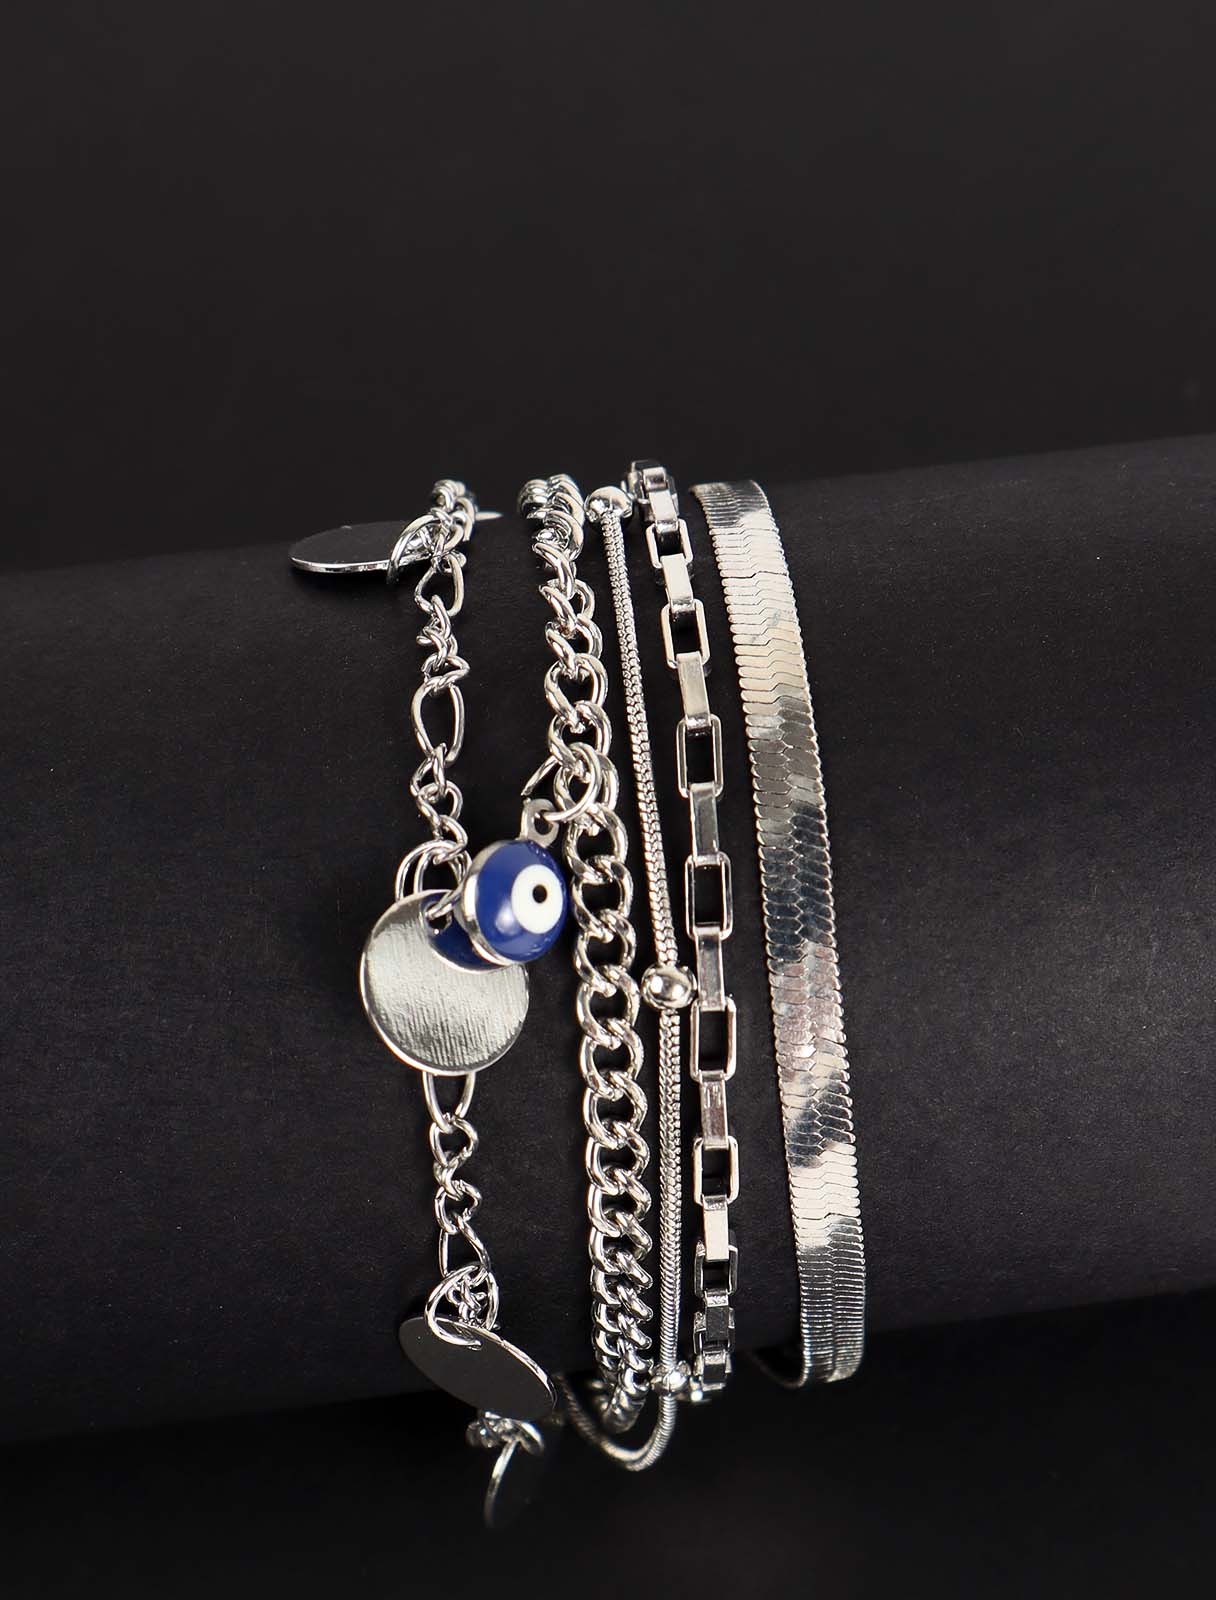 Layered bracelet with circles and eyes pendant